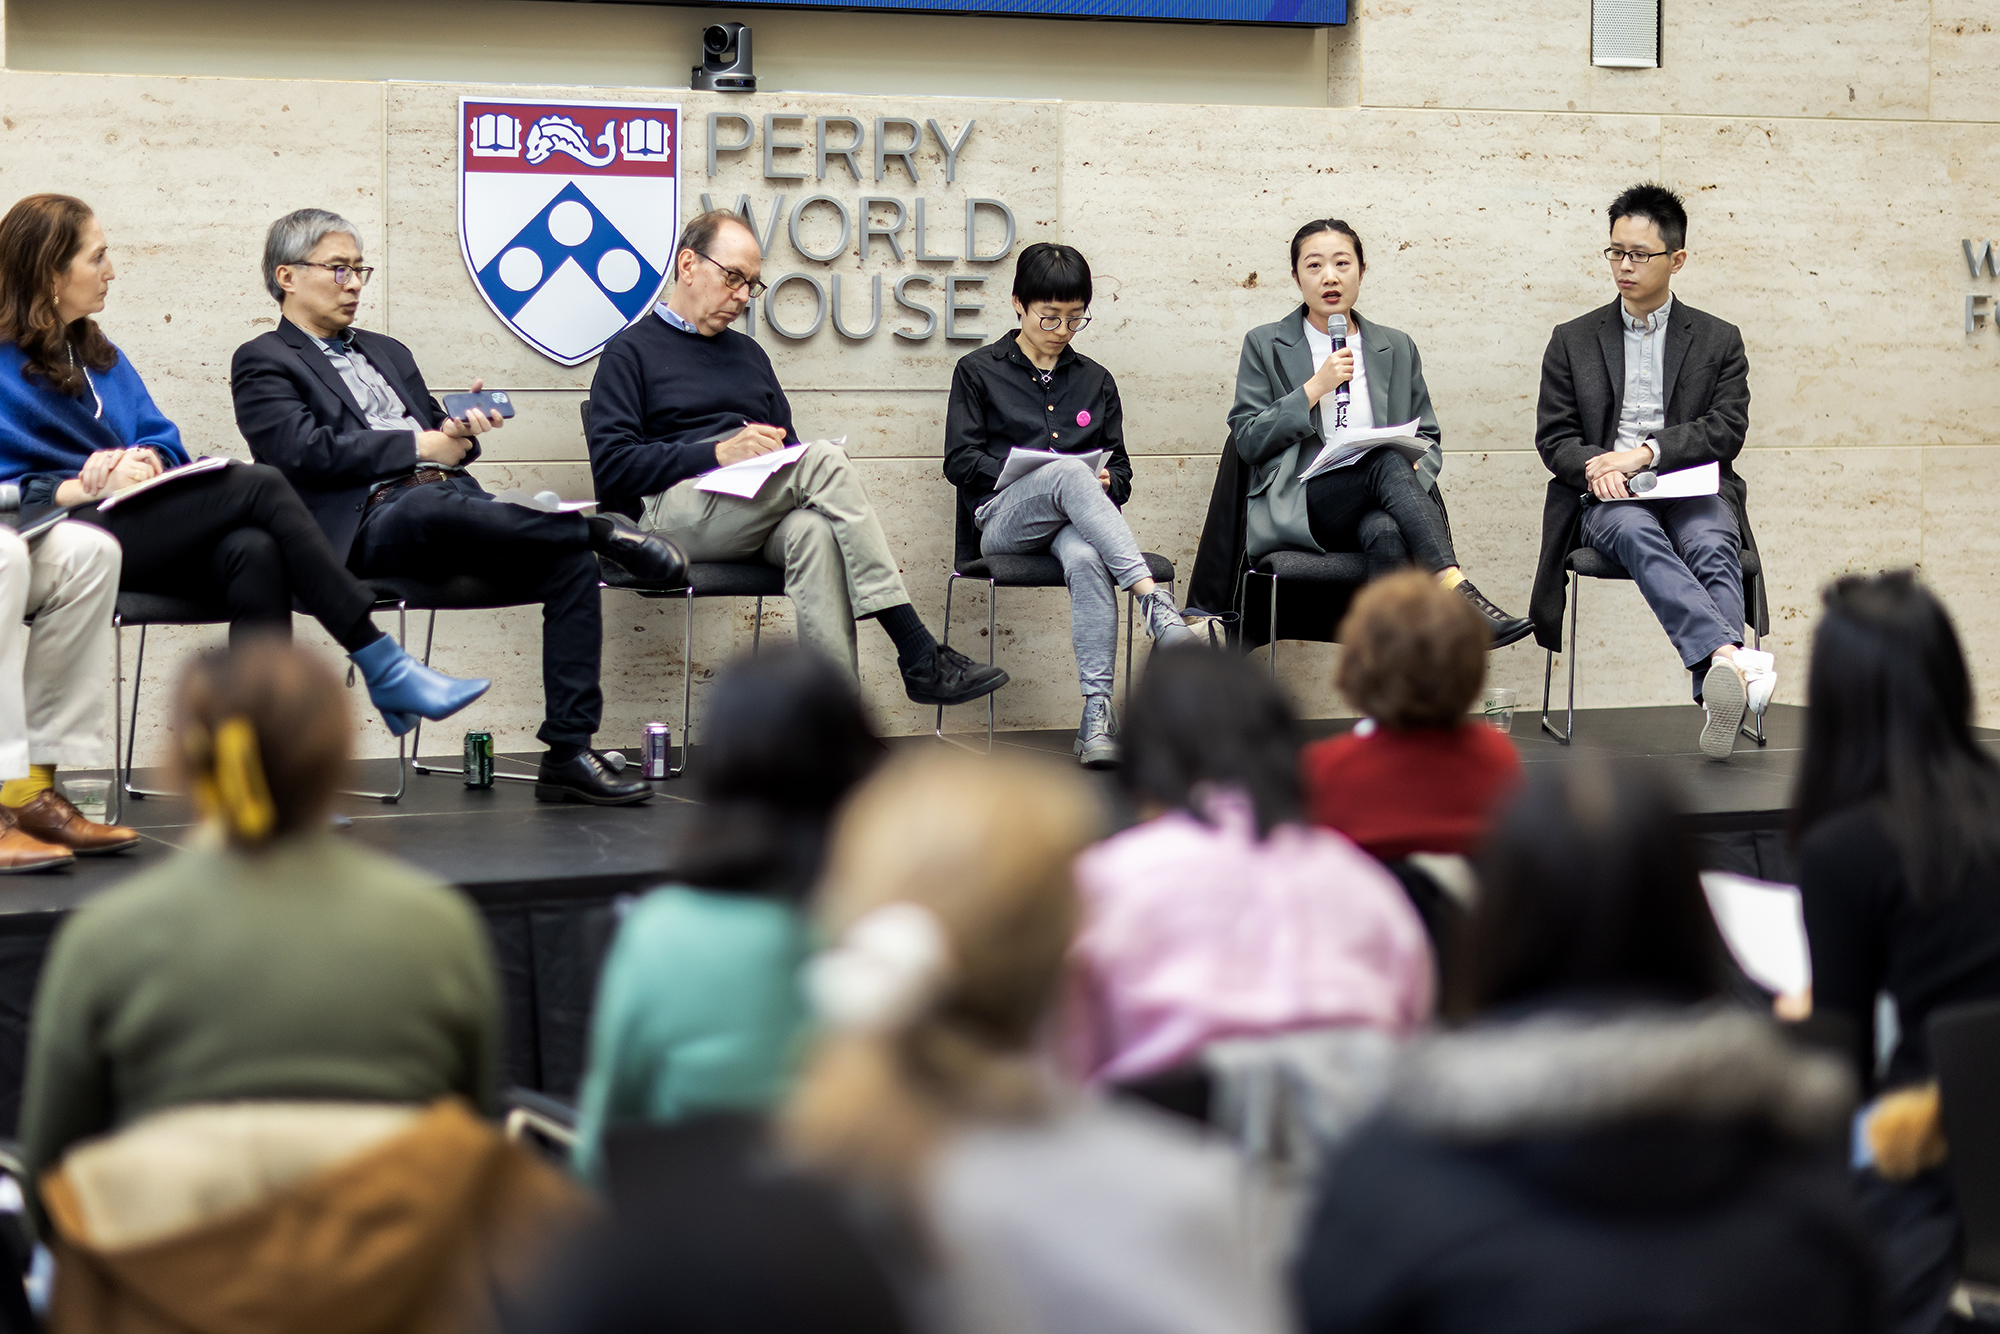 Speakers on a stage at Perry World House discuss the protests in China.